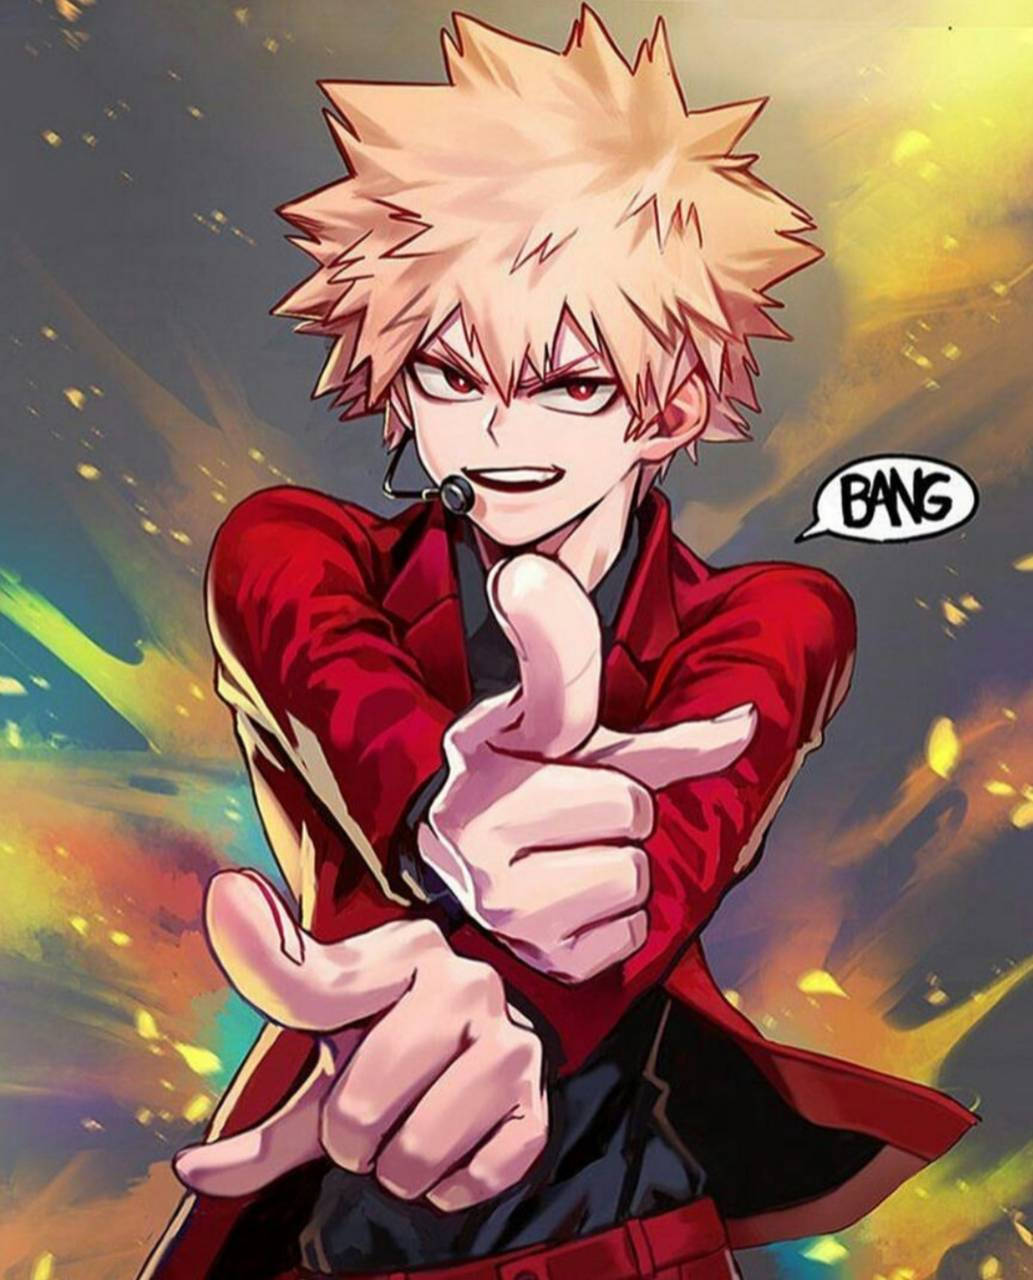 Cute Bakugou In His Signature Outfit